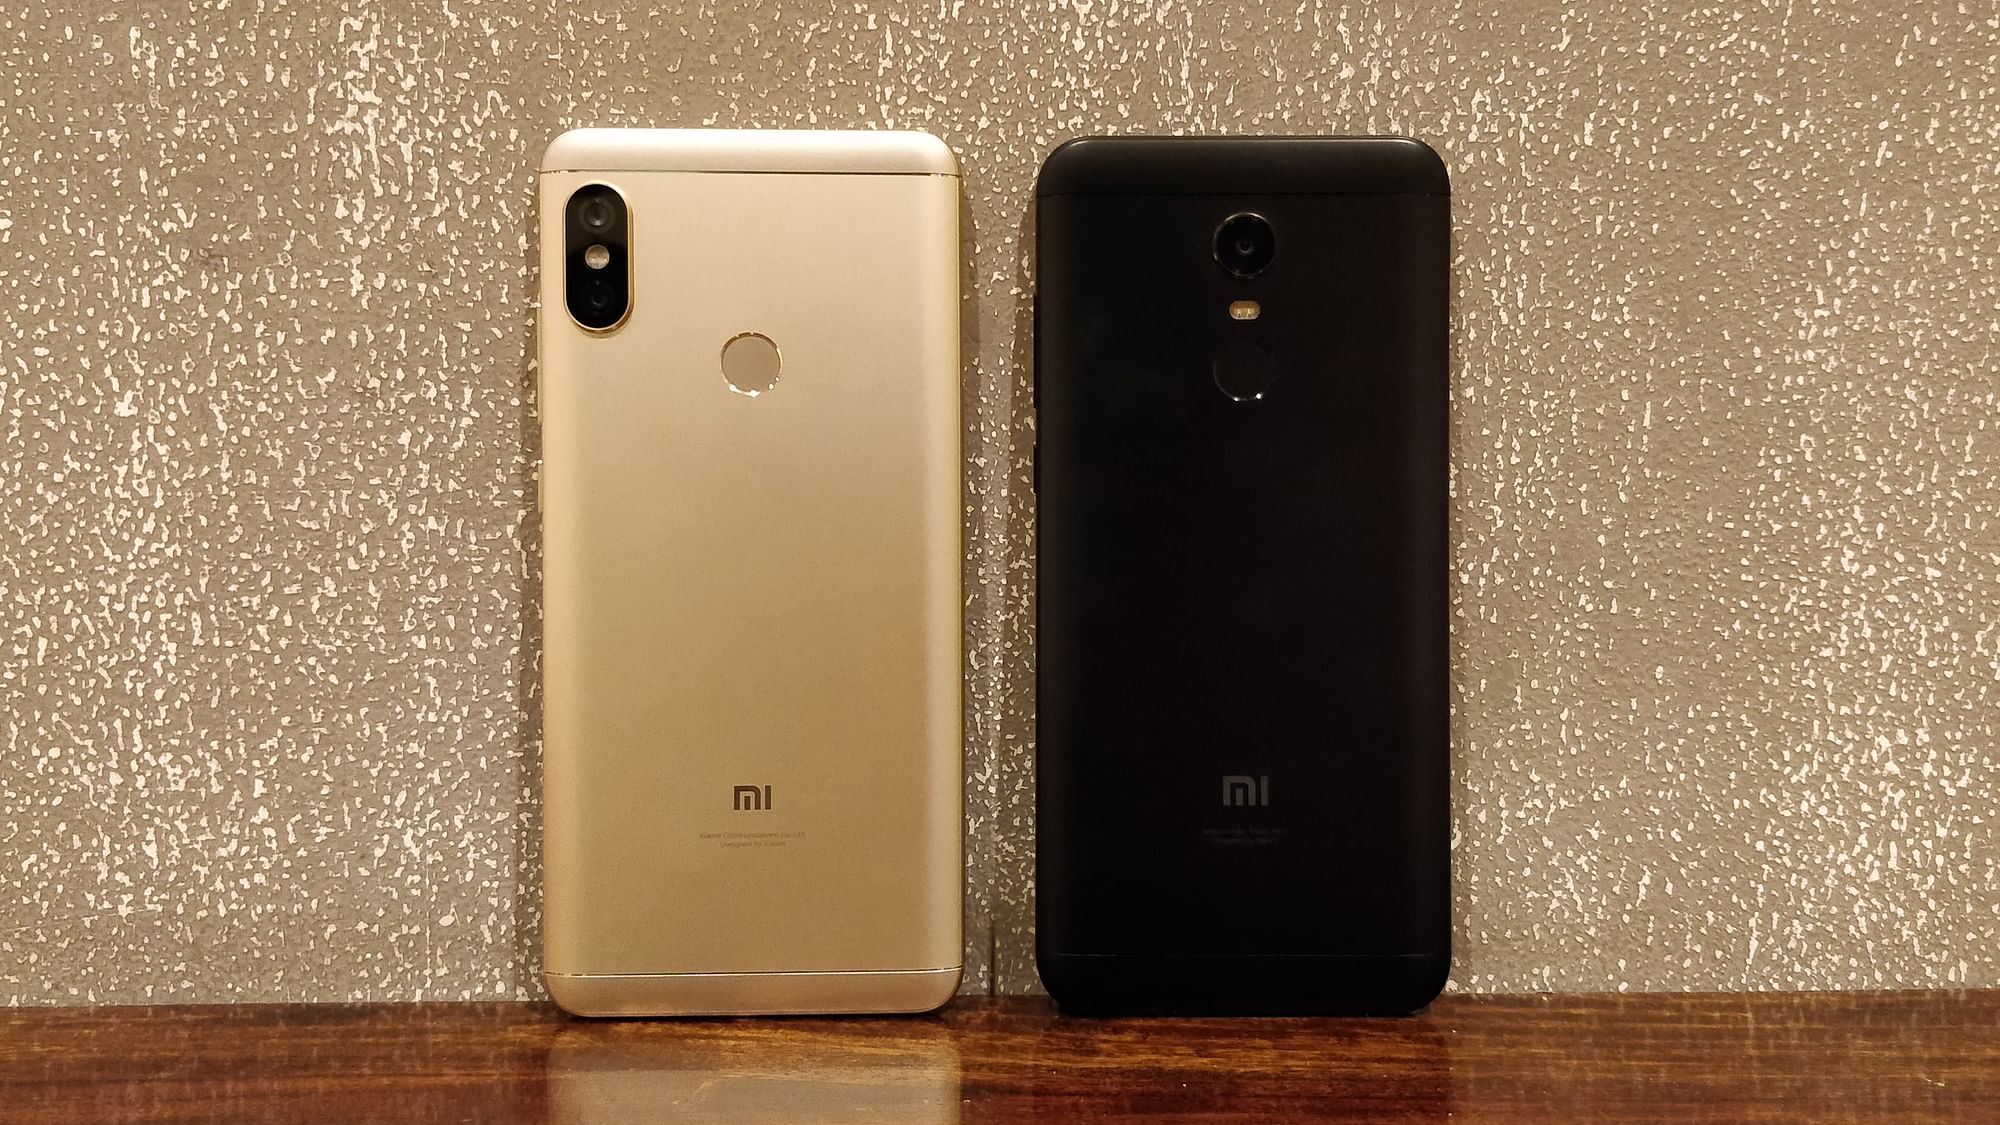 Both the Redmi phones come with full metal design